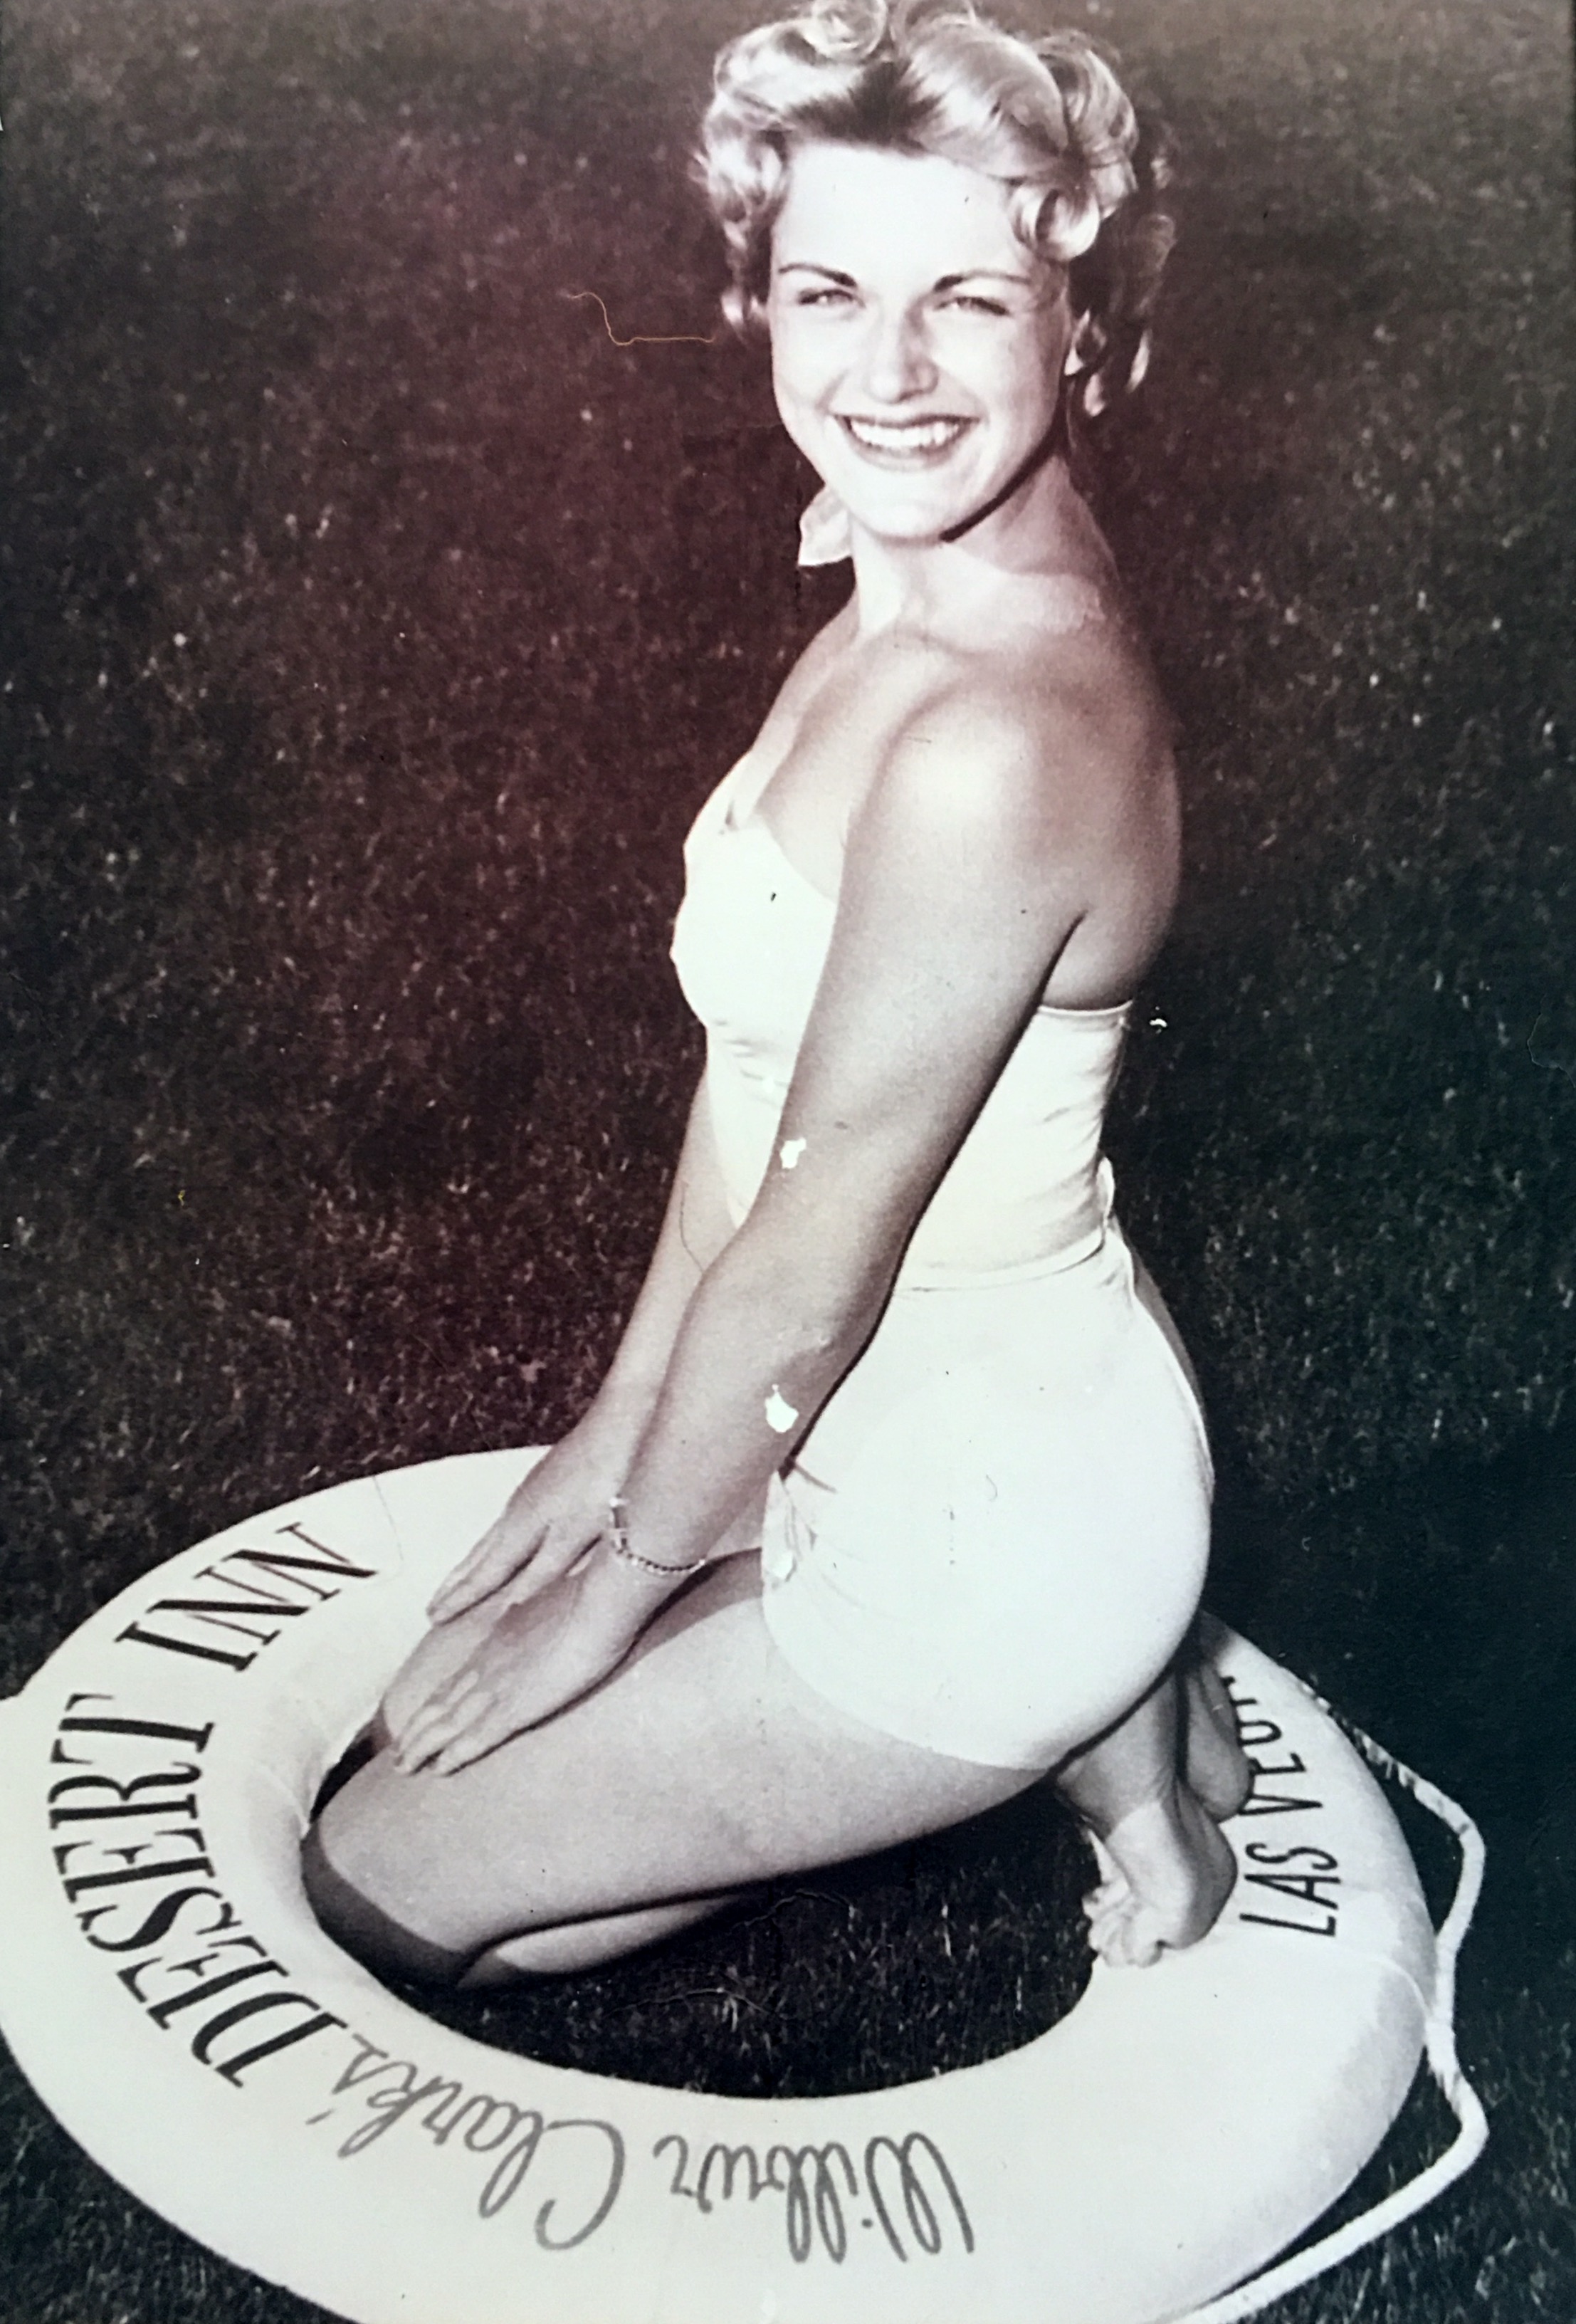 She may be Miss Las Vegas-1956, but she's Momzalou to me. And still beautiful! 